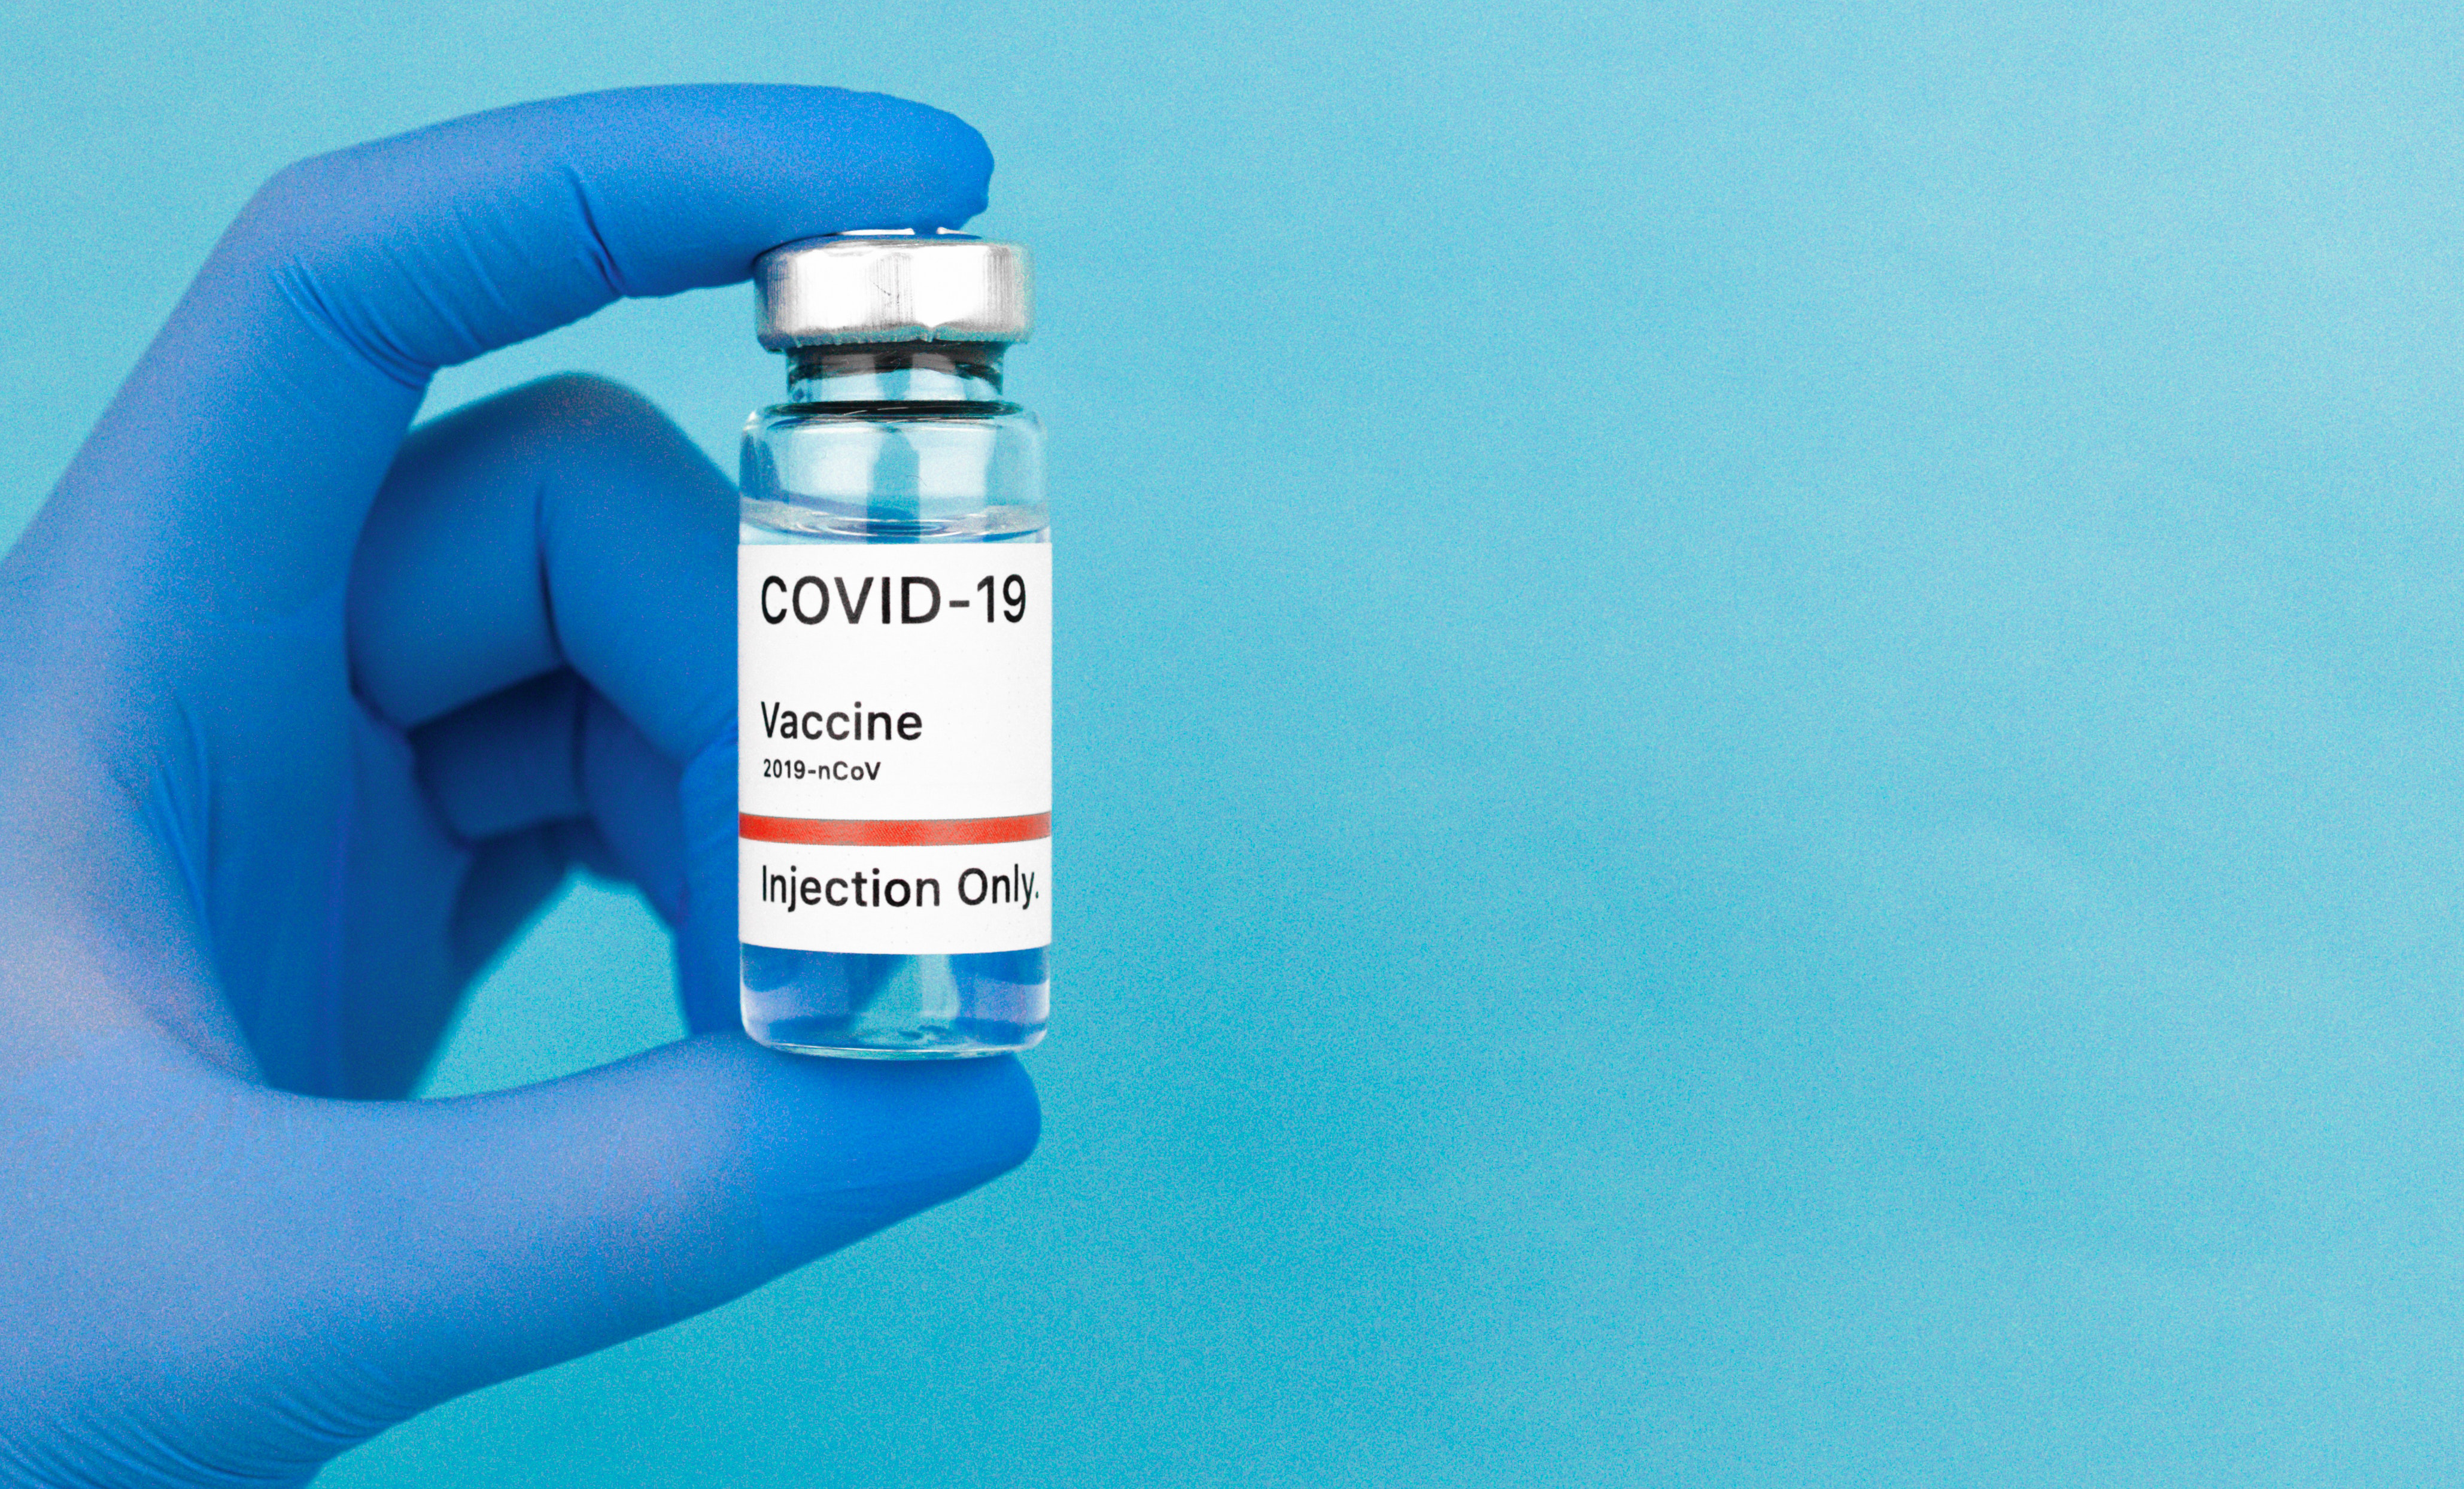 a bottle of COVID-19 vaccine